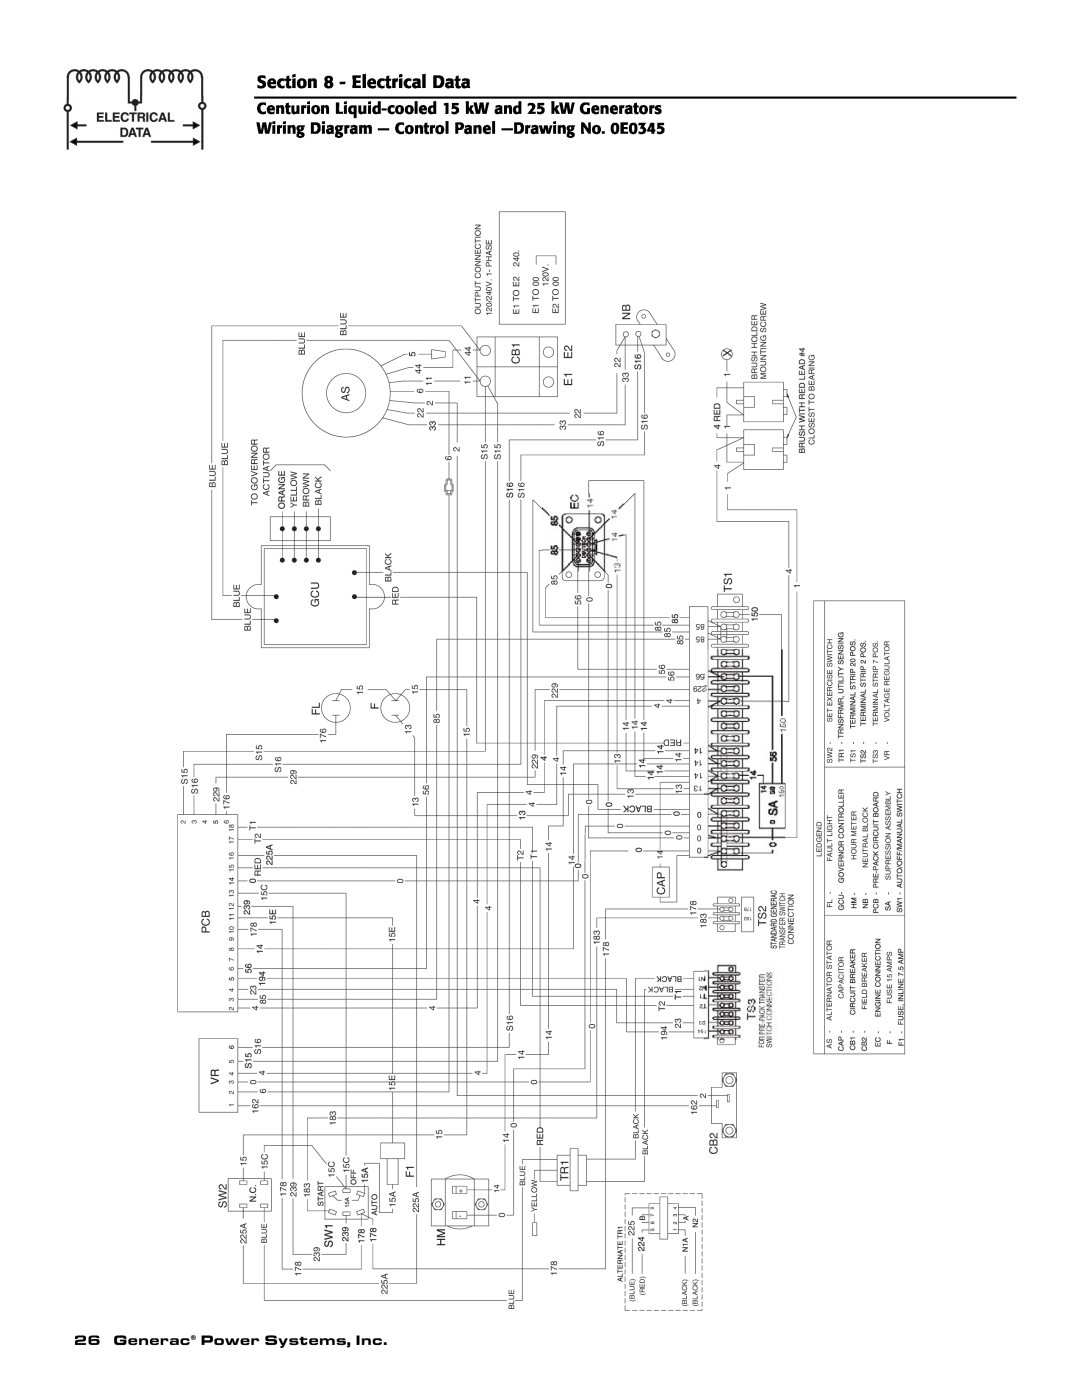 Generac 004912-0, 004912-1, 004913-0, 004913-1 Section, Wiring Diagram, CenturionLiquid, cooled 15 Control, kW and 25 kW 